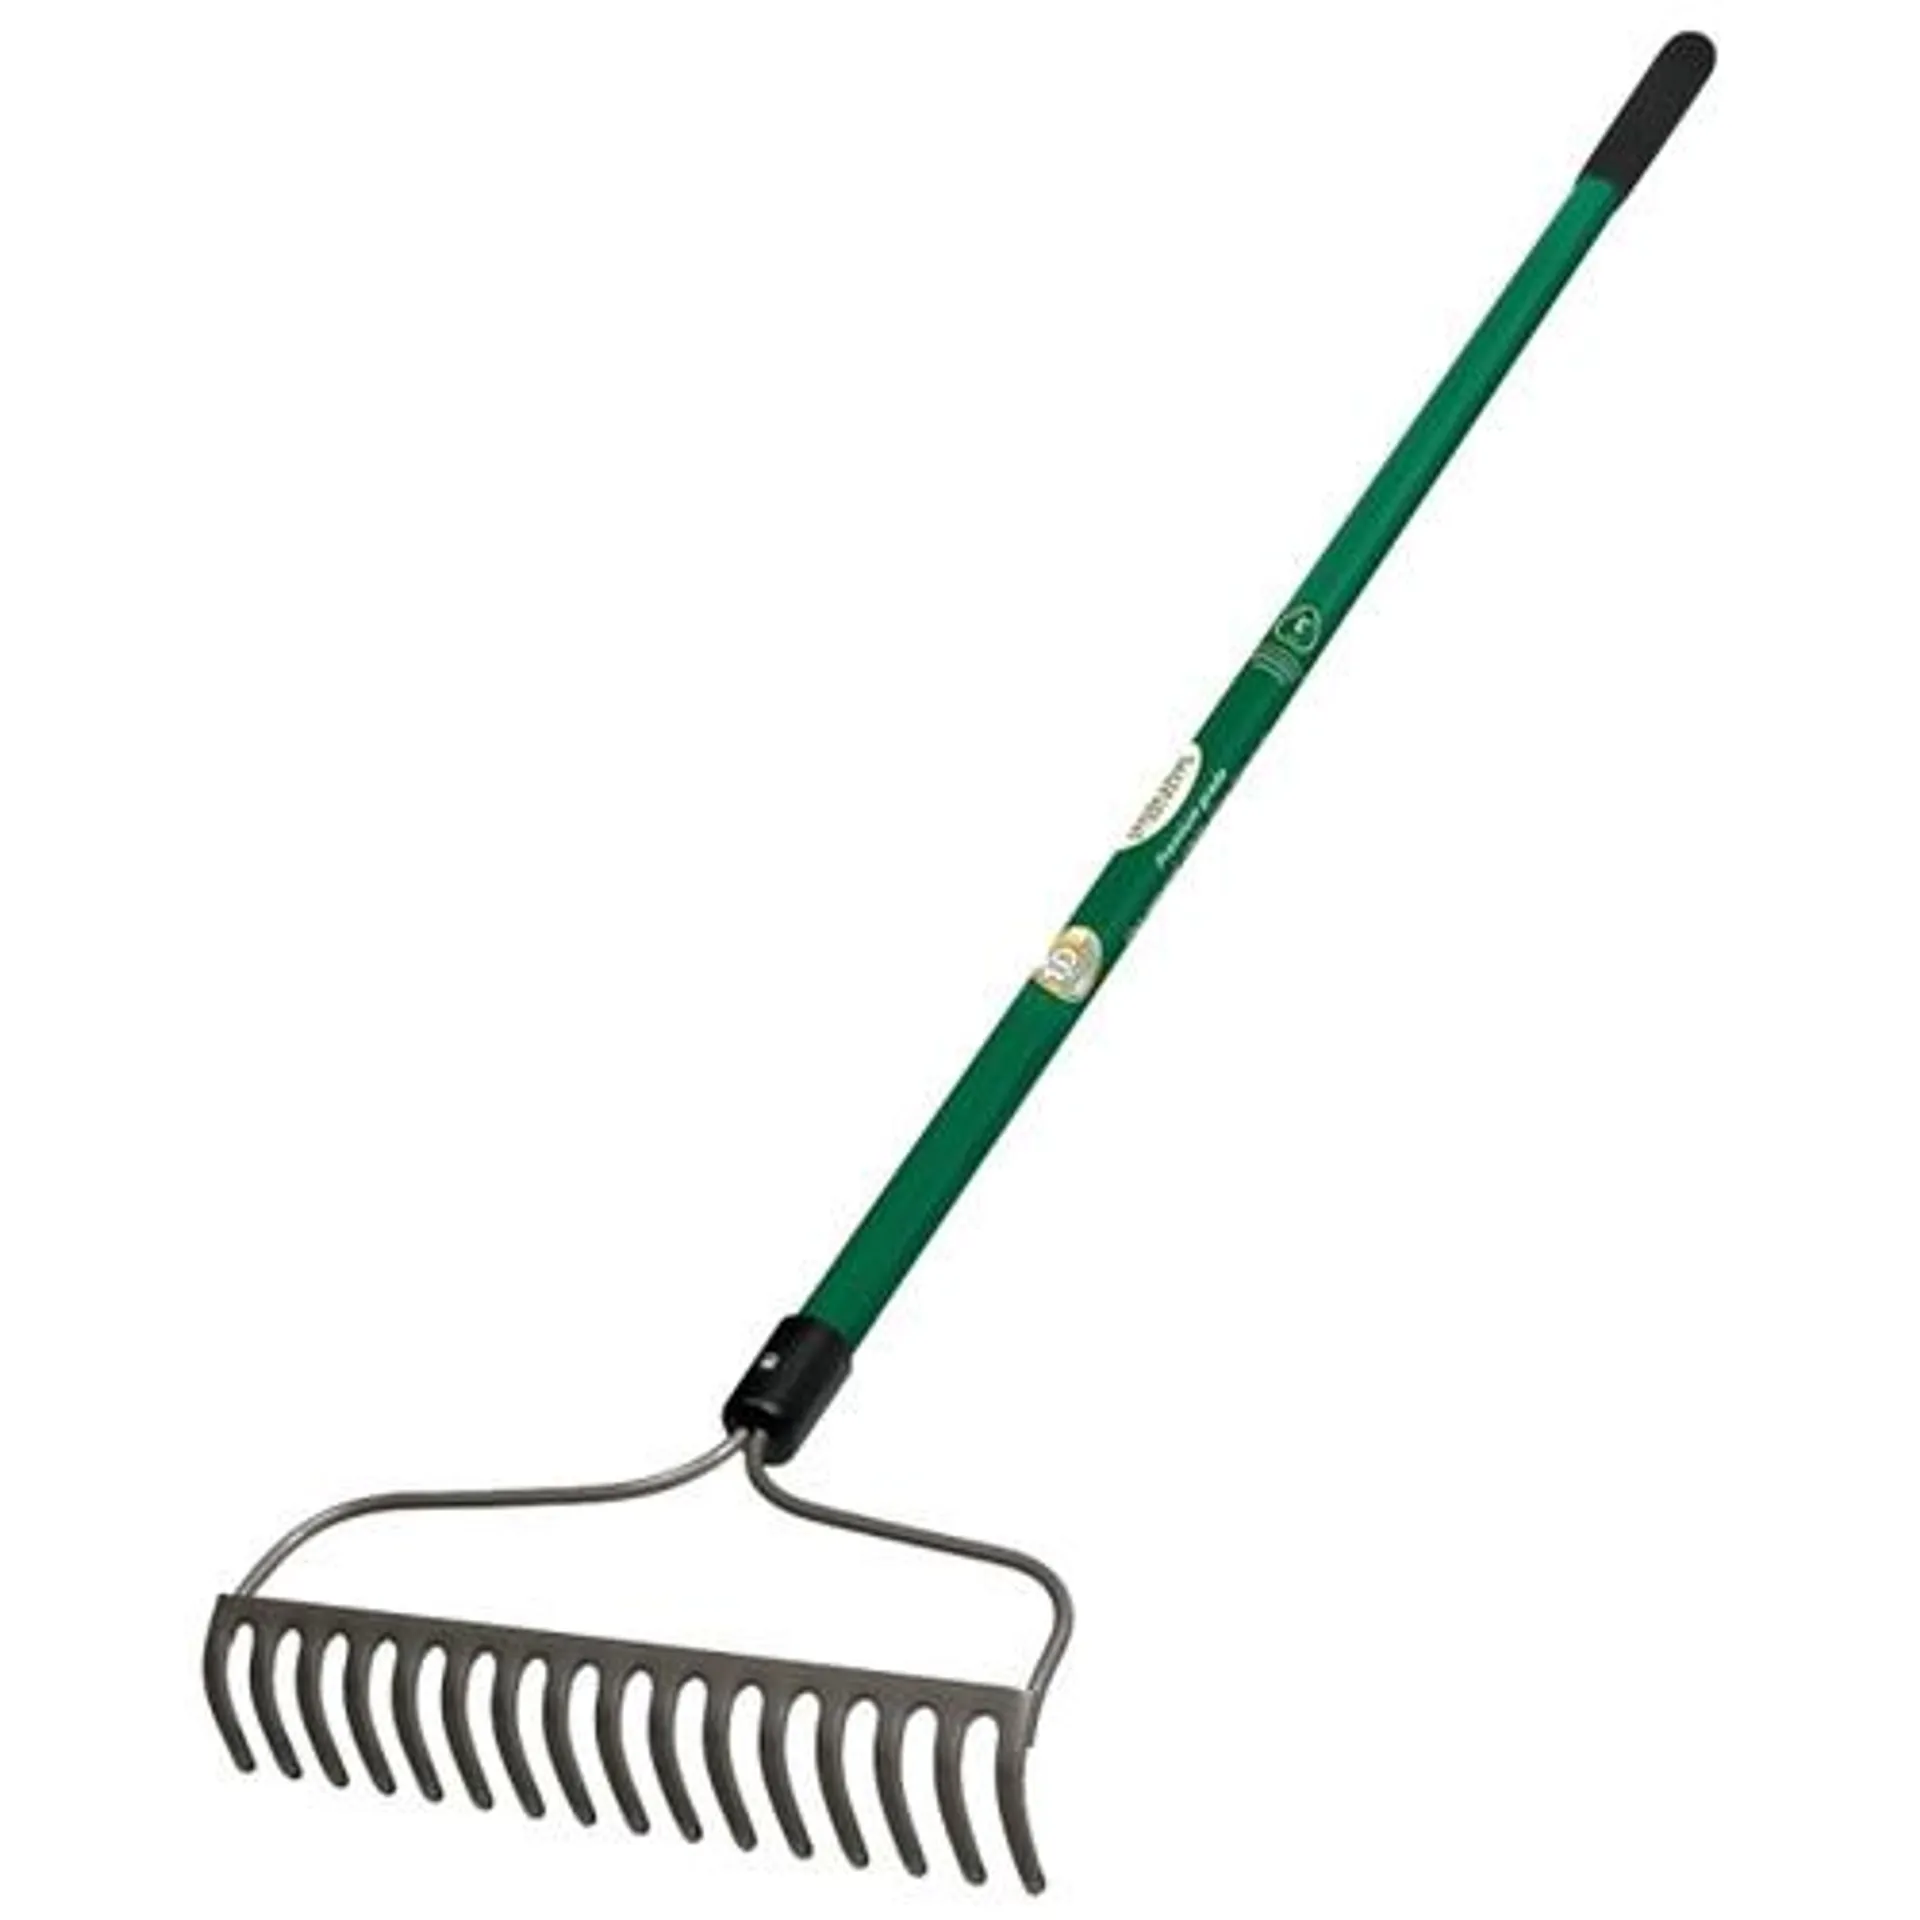 Landscapers Select 34583 Bow Rake, 16 in W Head, 16 -Tine, Steel